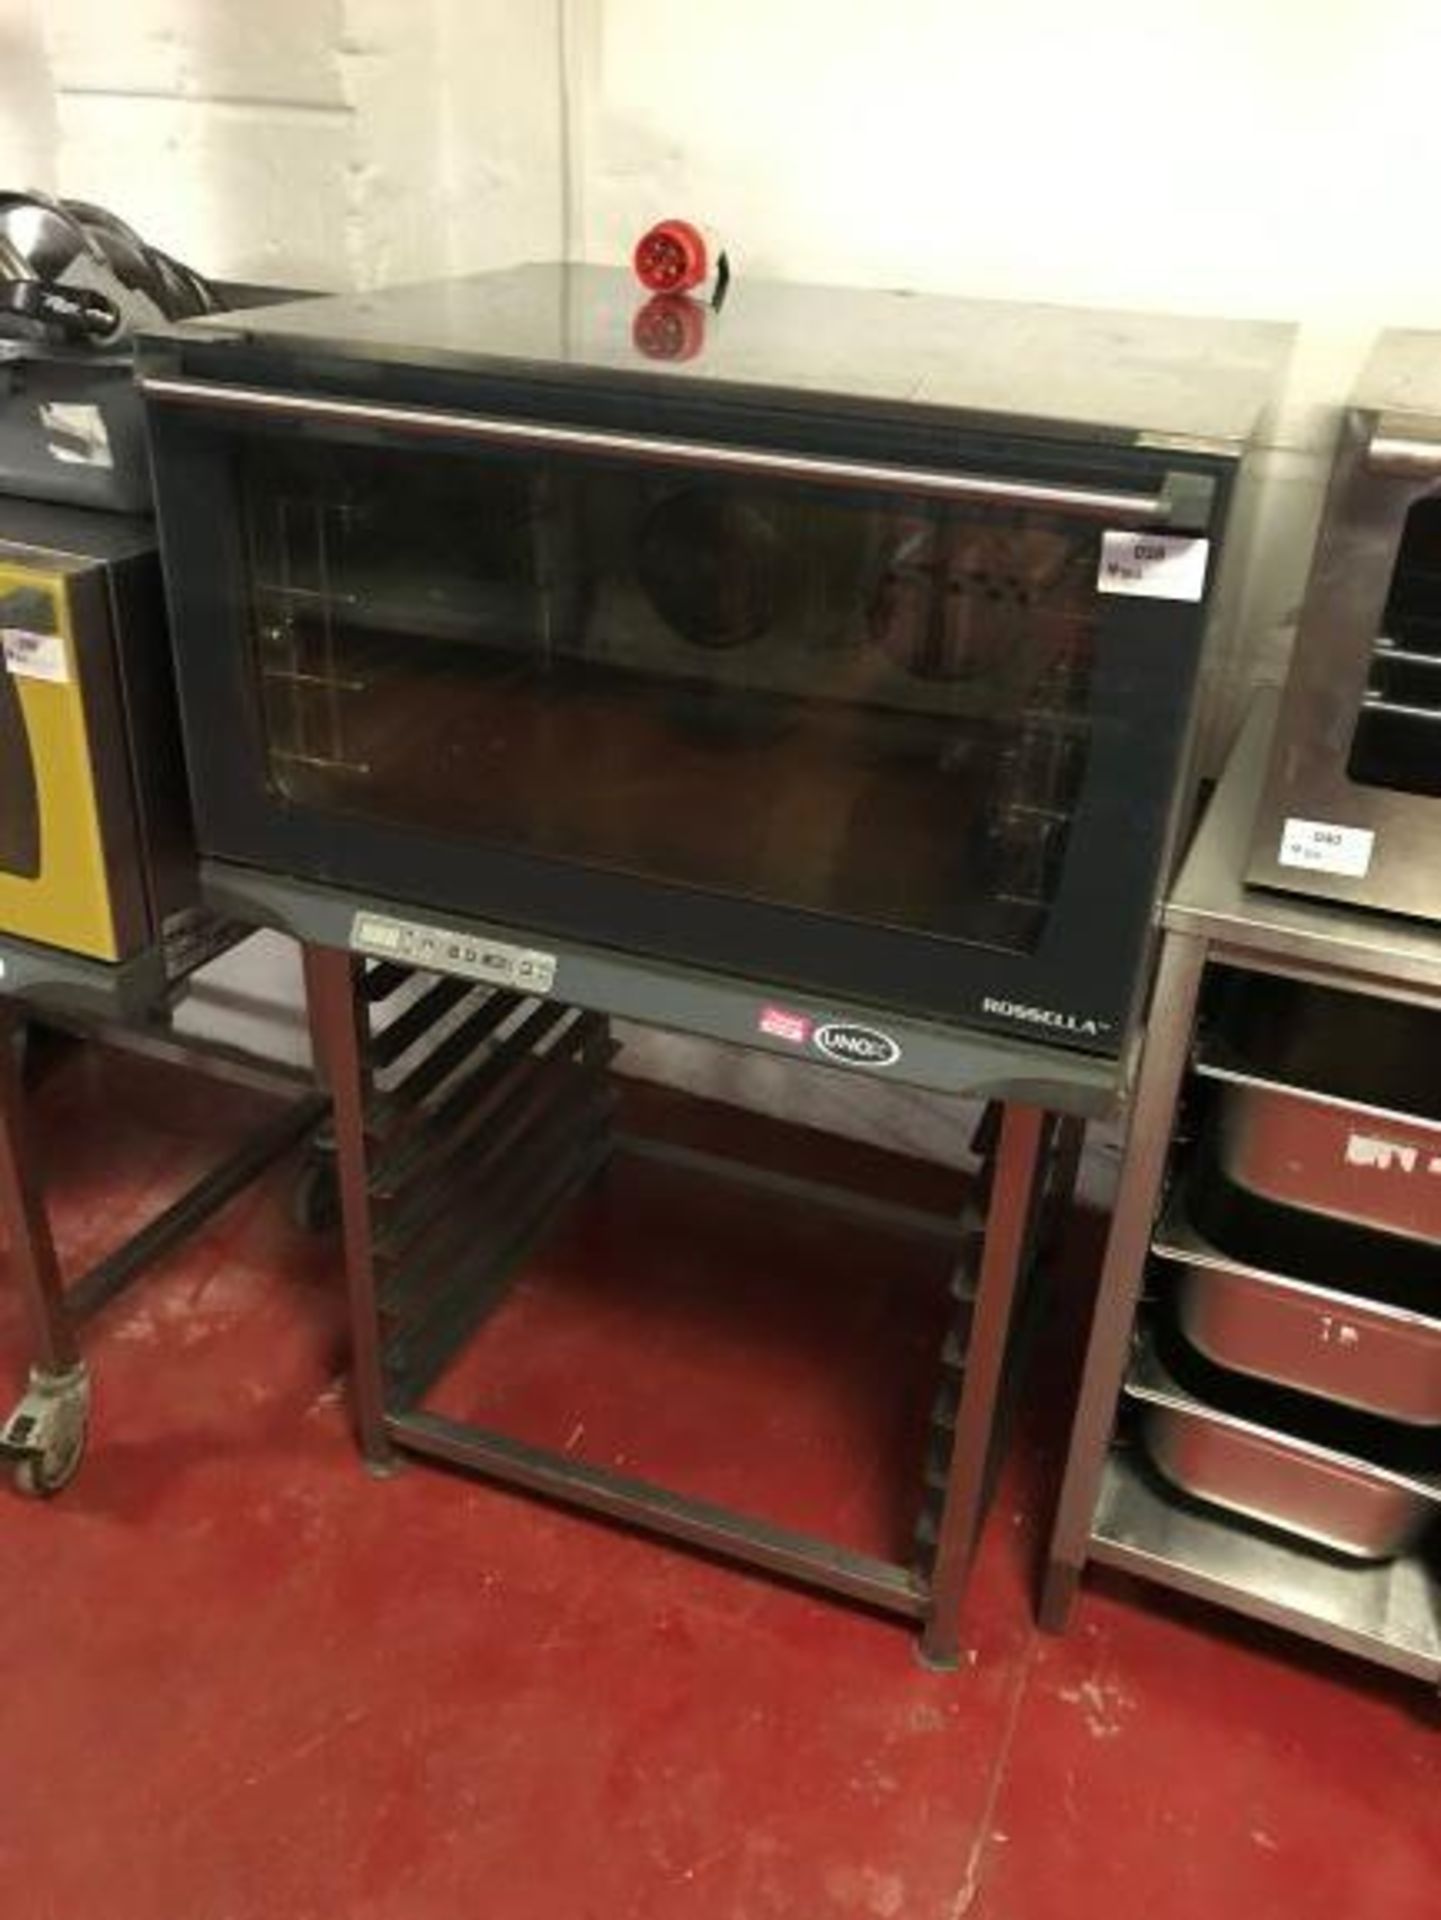 Unox Rosella XF190-B professional manual convection bakery oven - Image 4 of 4